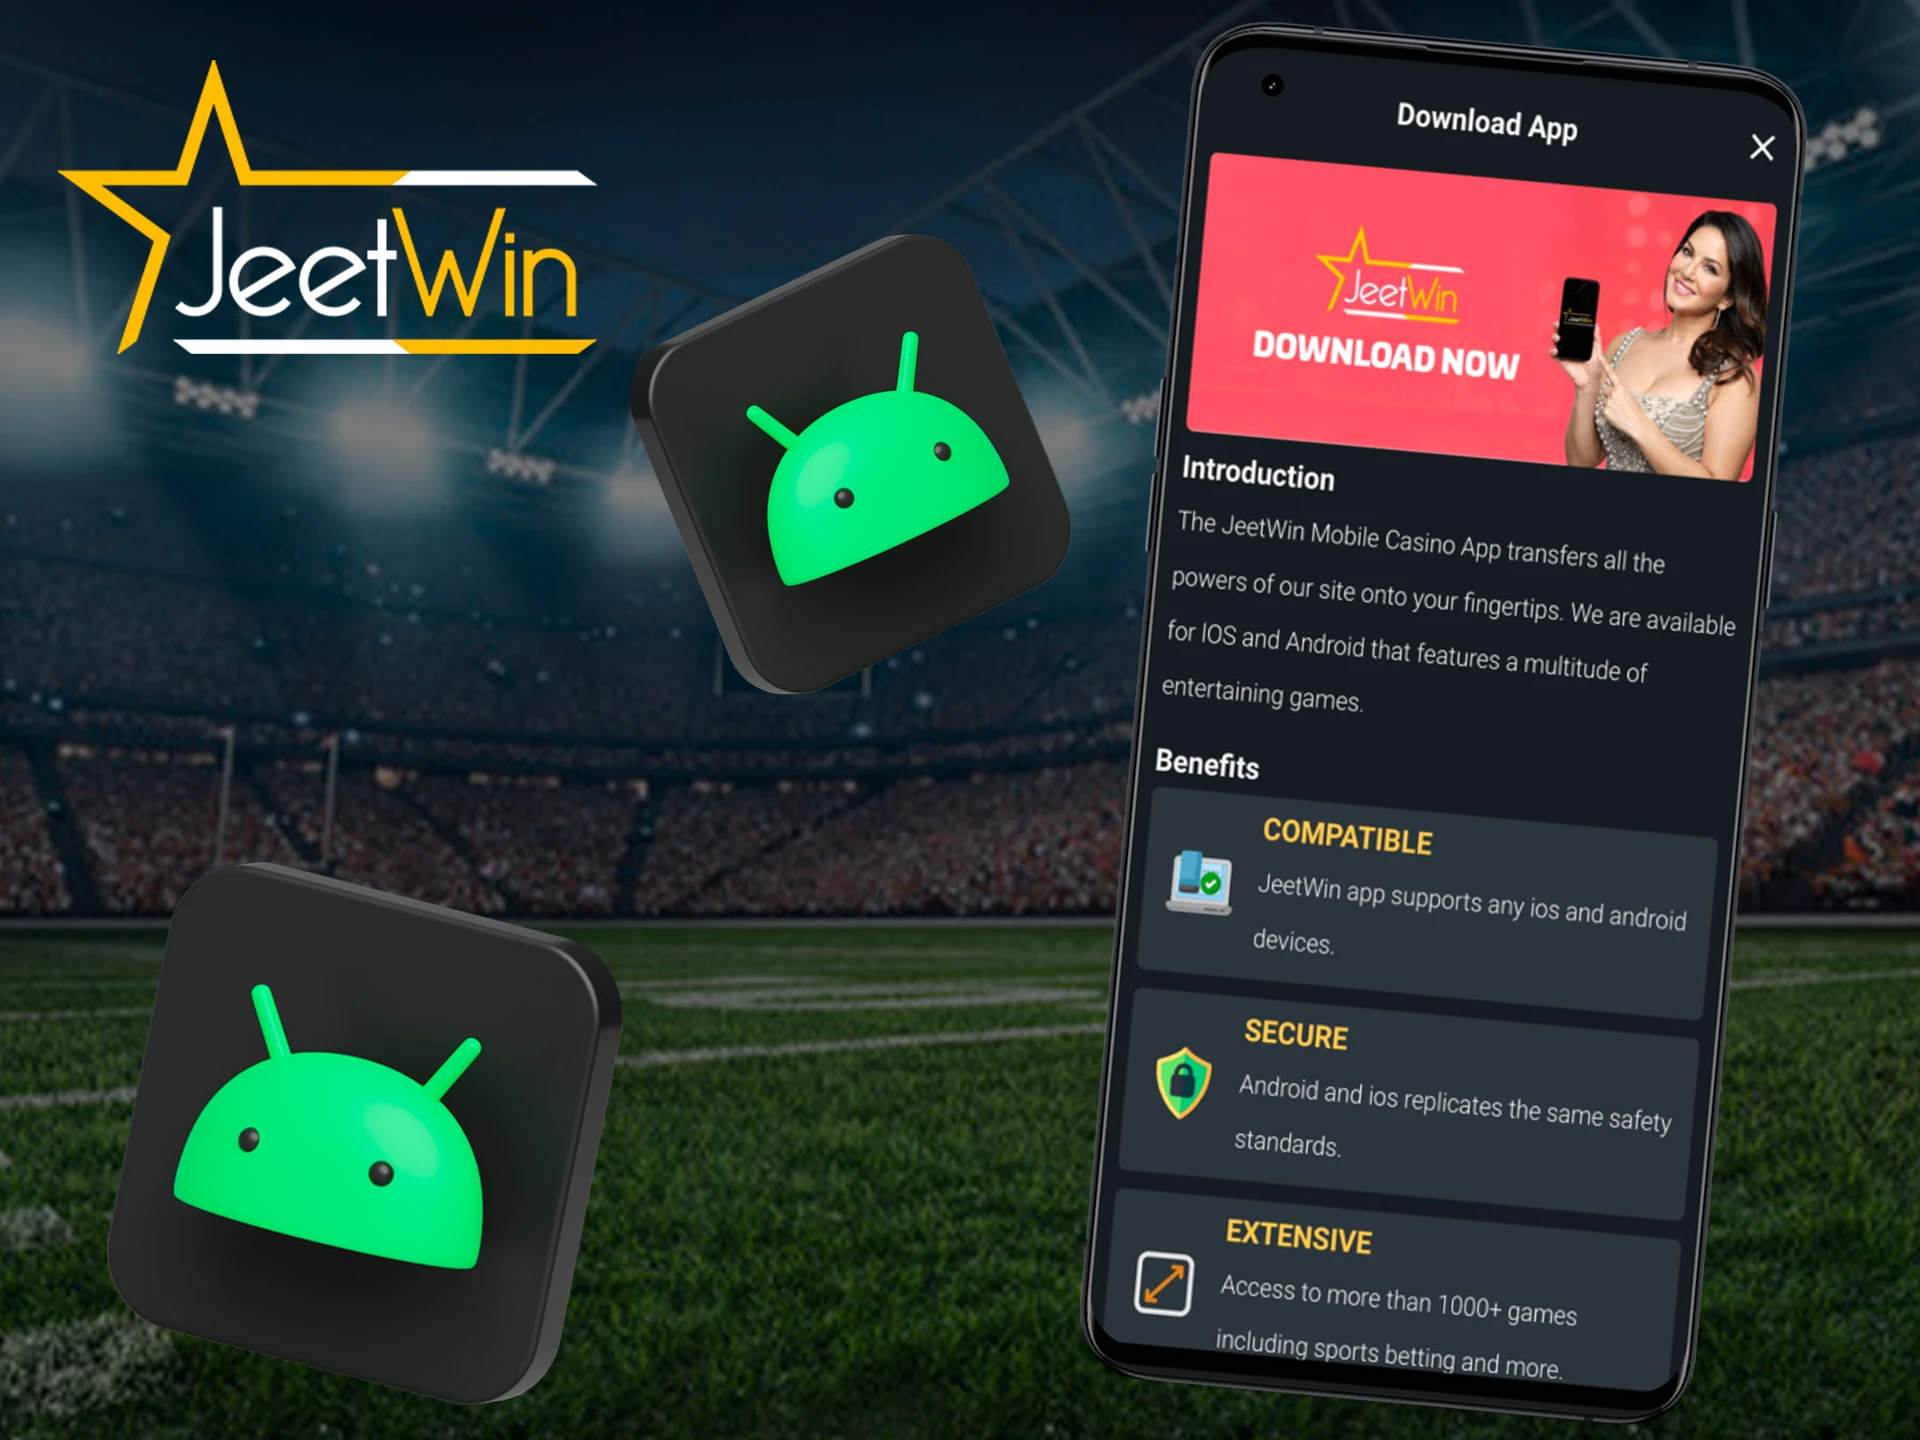 Try your luck with the JeetWin app on your android device.